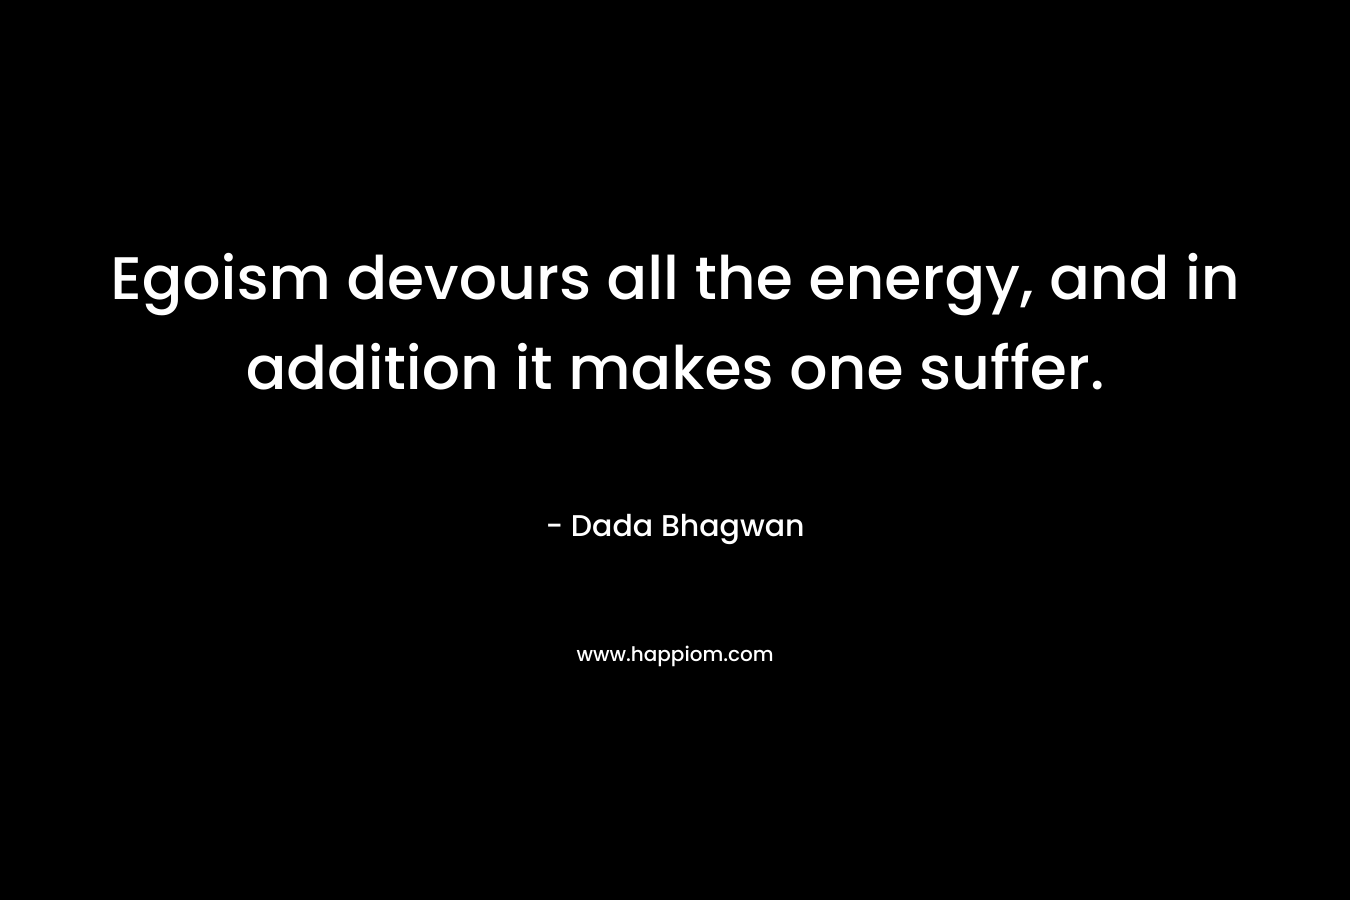 Egoism devours all the energy, and in addition it makes one suffer.